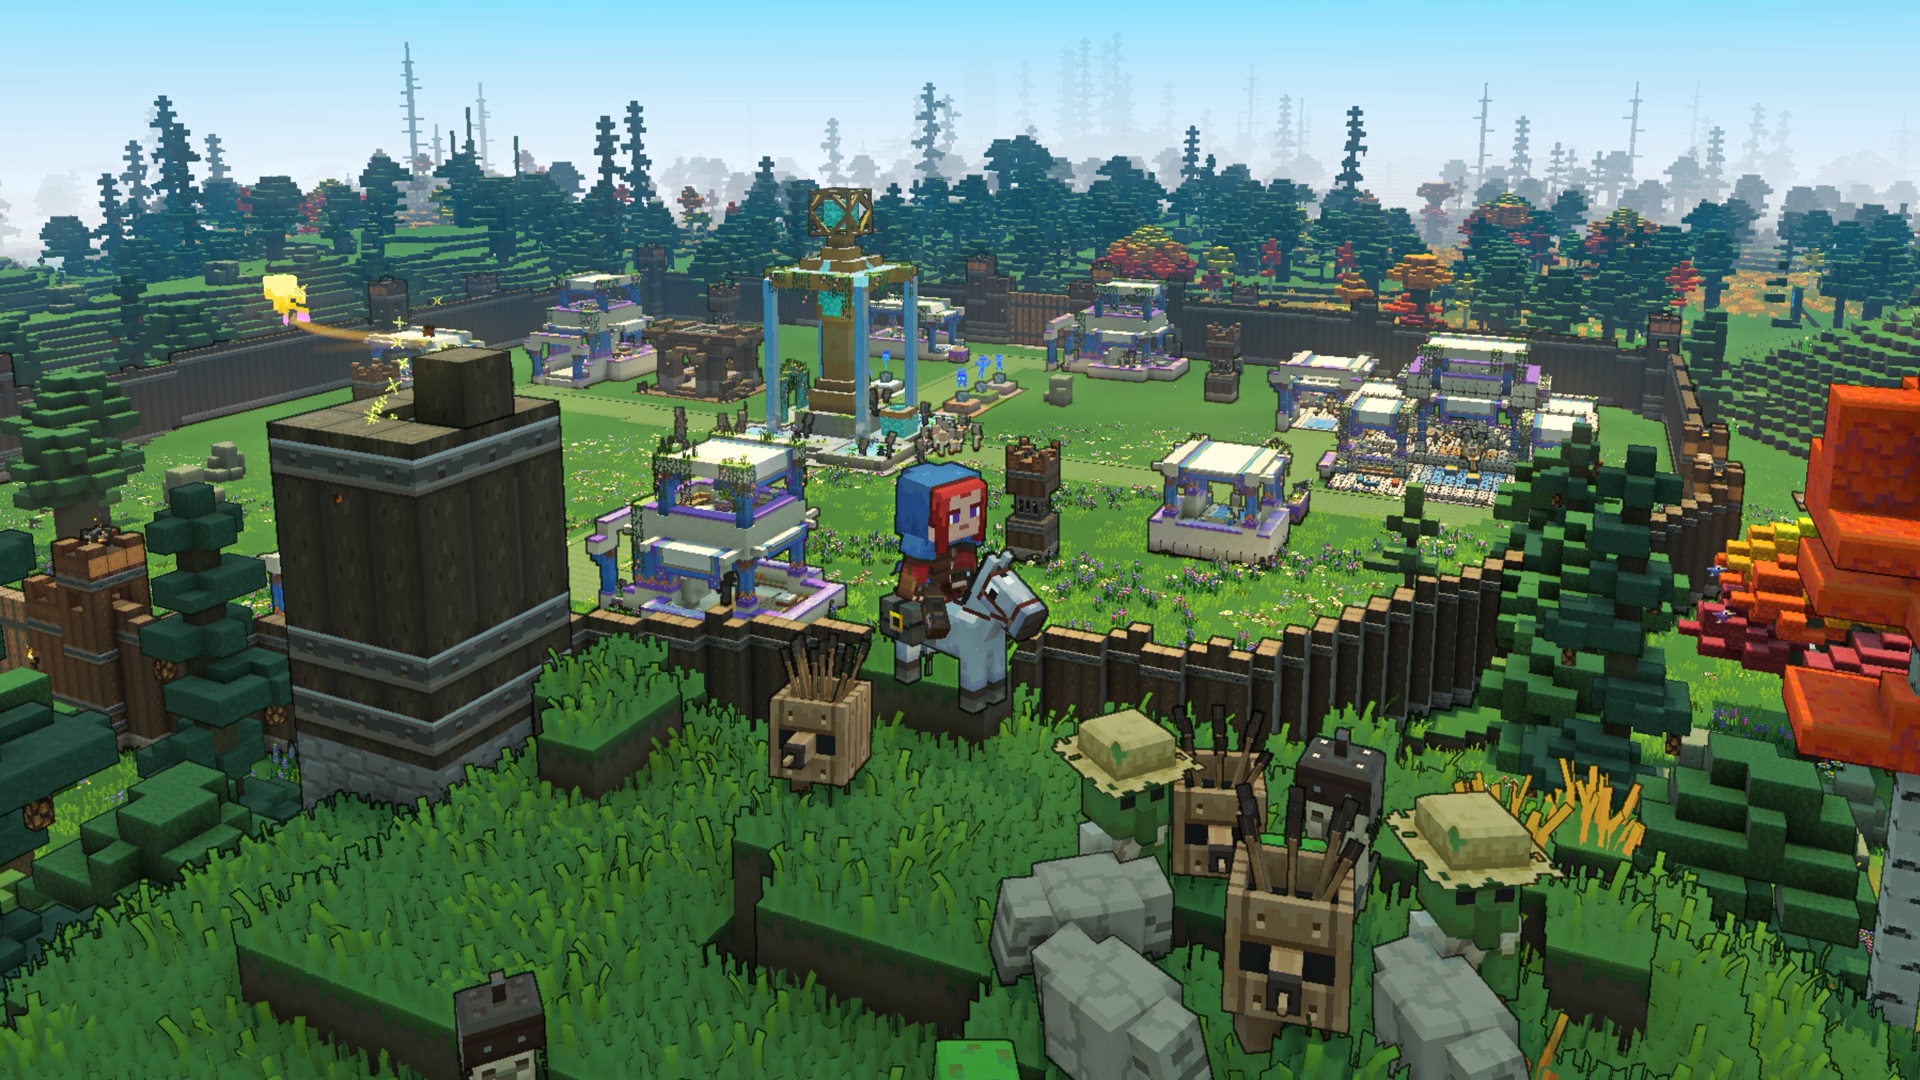 Minecraft Legends player on a mount stands on a grassy hill overlooking a base with wooden walls and several structures inside.